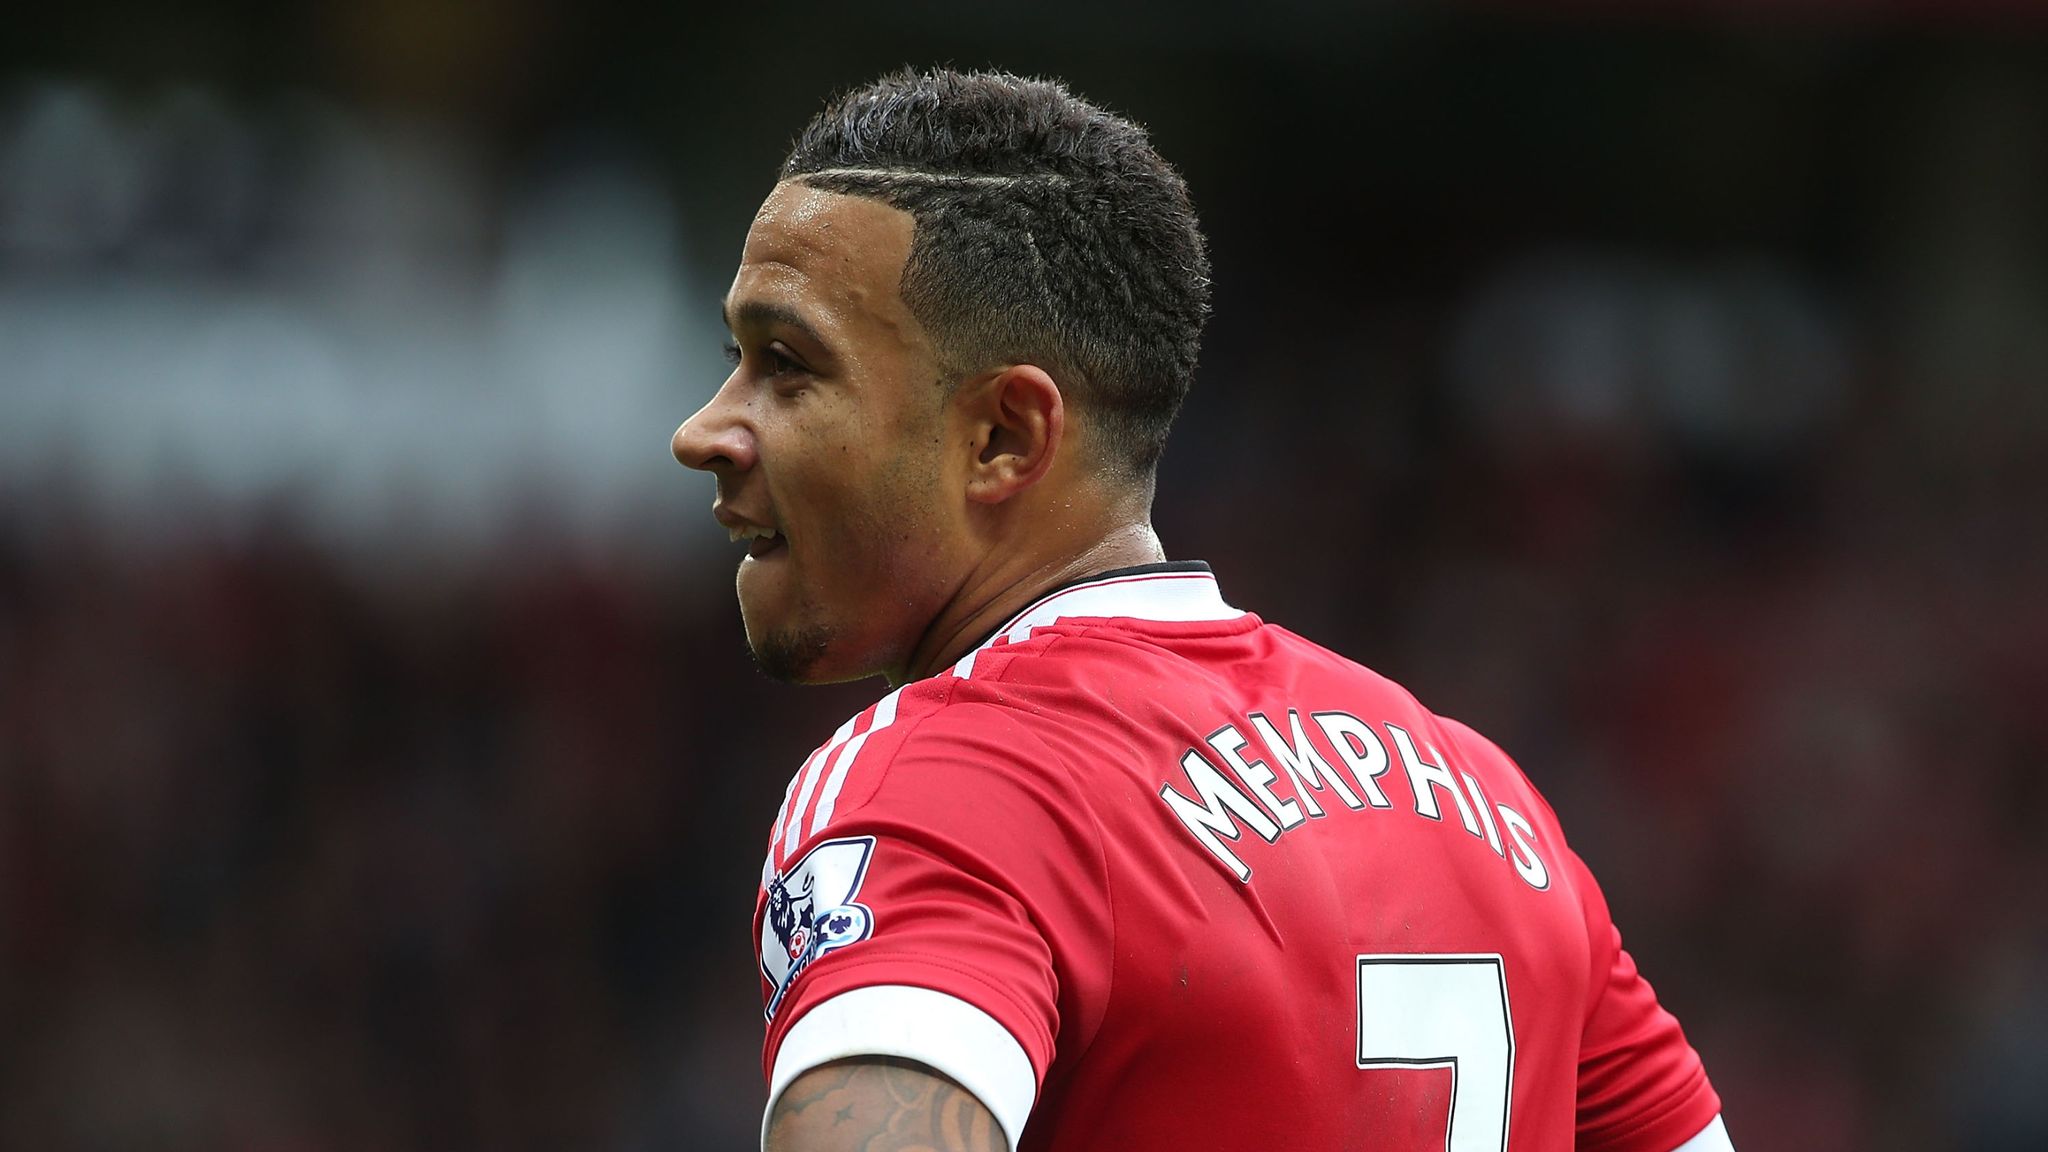 Memphis Depay can handle the pressure of wearing Manchester United's famous  No 7 shirt, believes club legend Bryan Robson